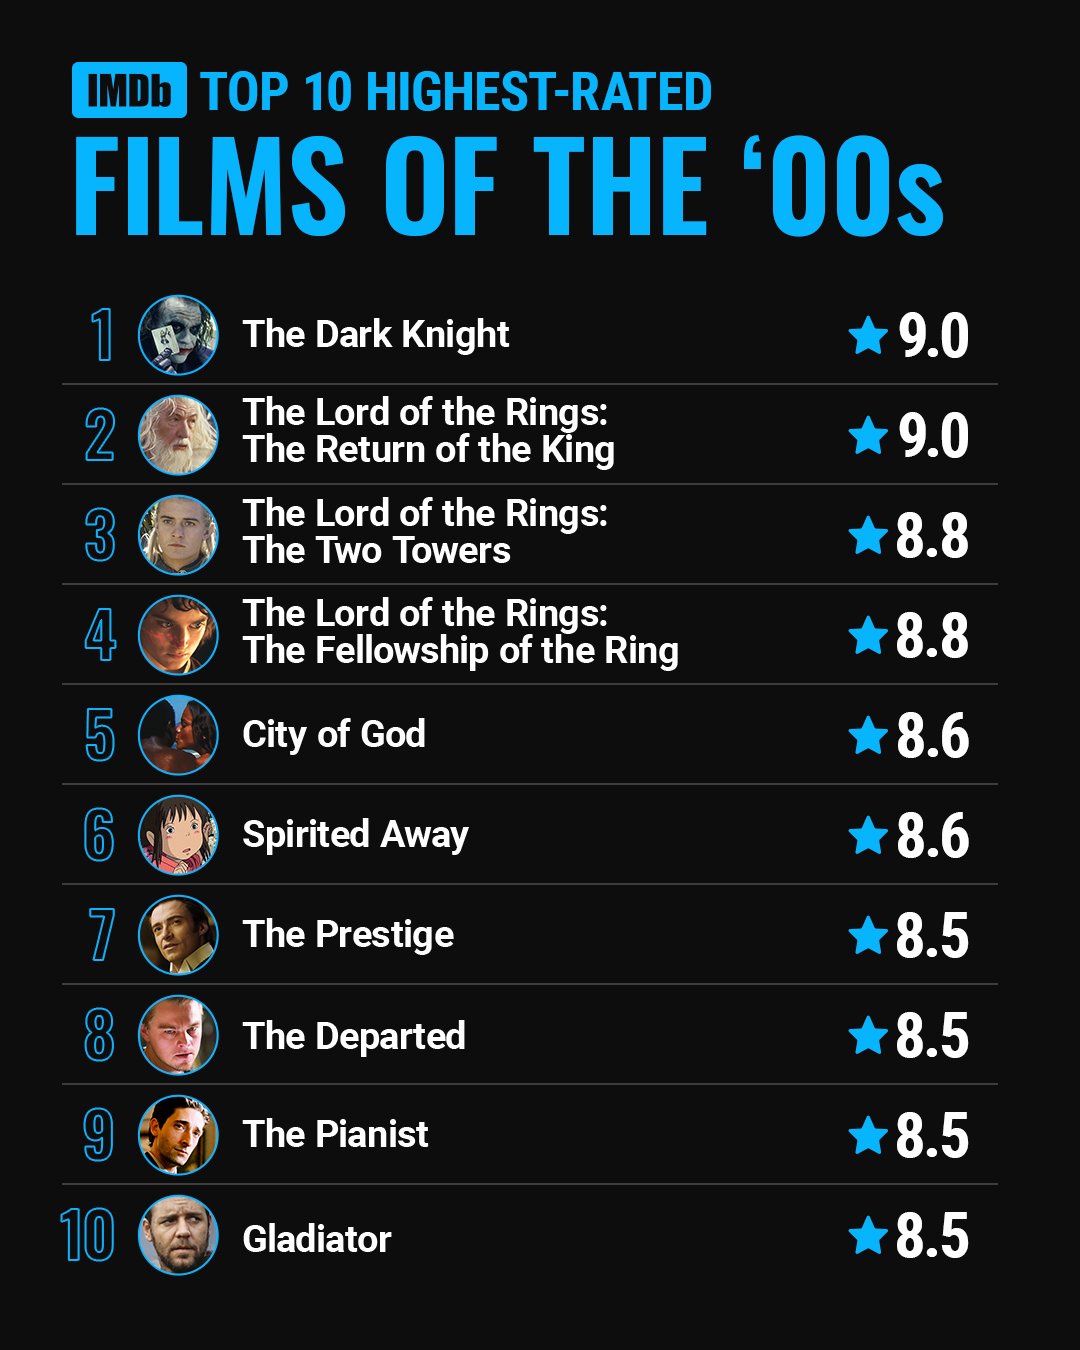 IMDb on Twitter: "Here are top 10 highest-rated films the turn of the century. 💫 Did your favorite make the list? https://t.co/e7nAPRIBf6" / Twitter